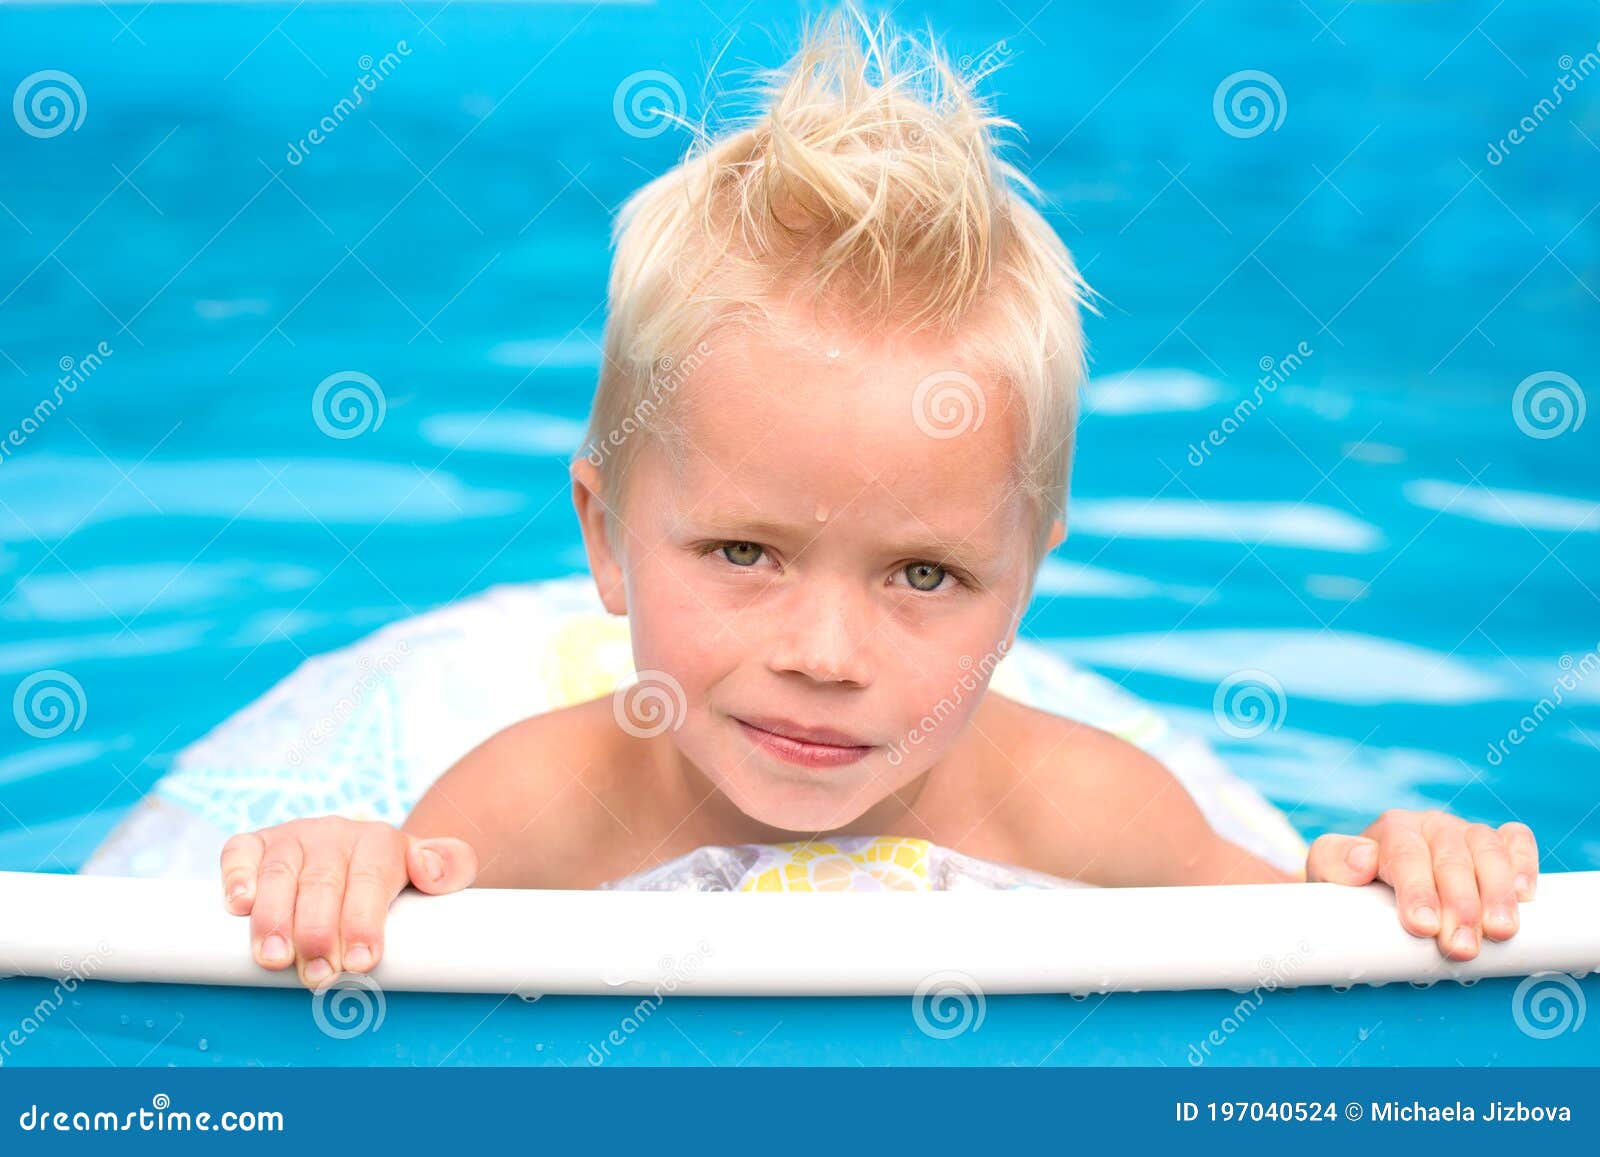 little blond boy is in swimming pool with inflable ring